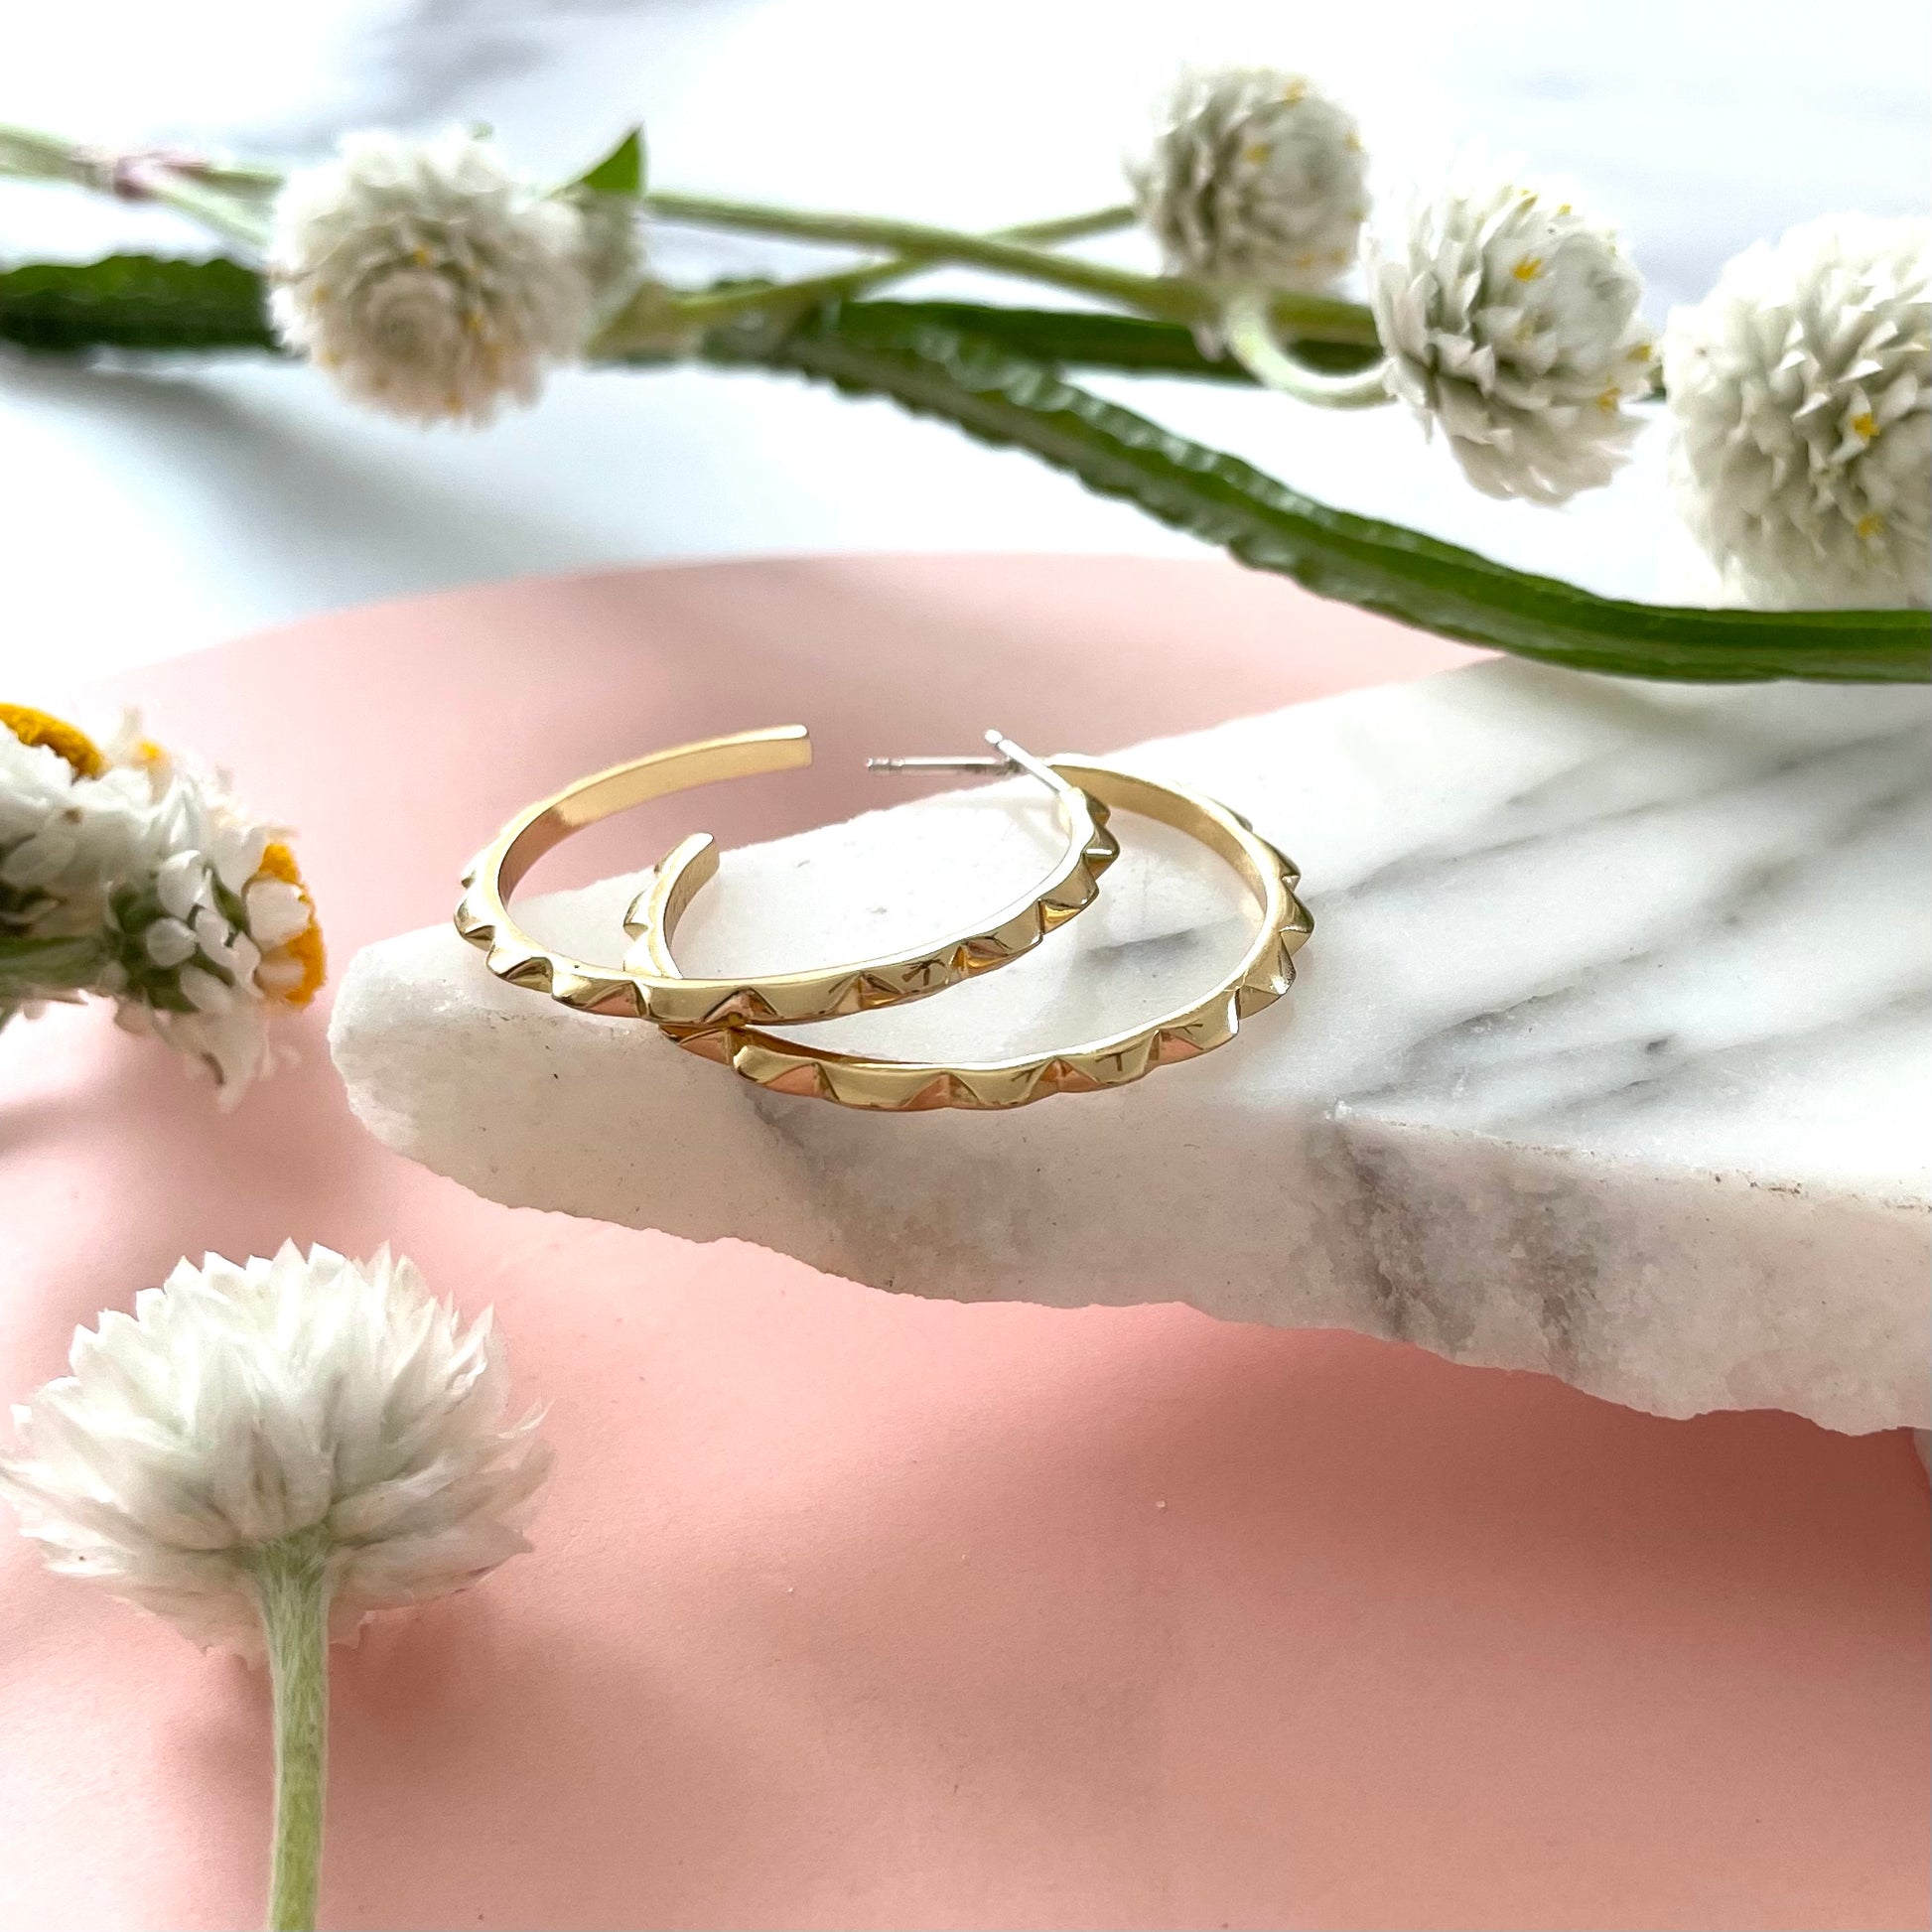 Handmade gold hoop earrings on a marble displayed with a pink background and fresh flowers